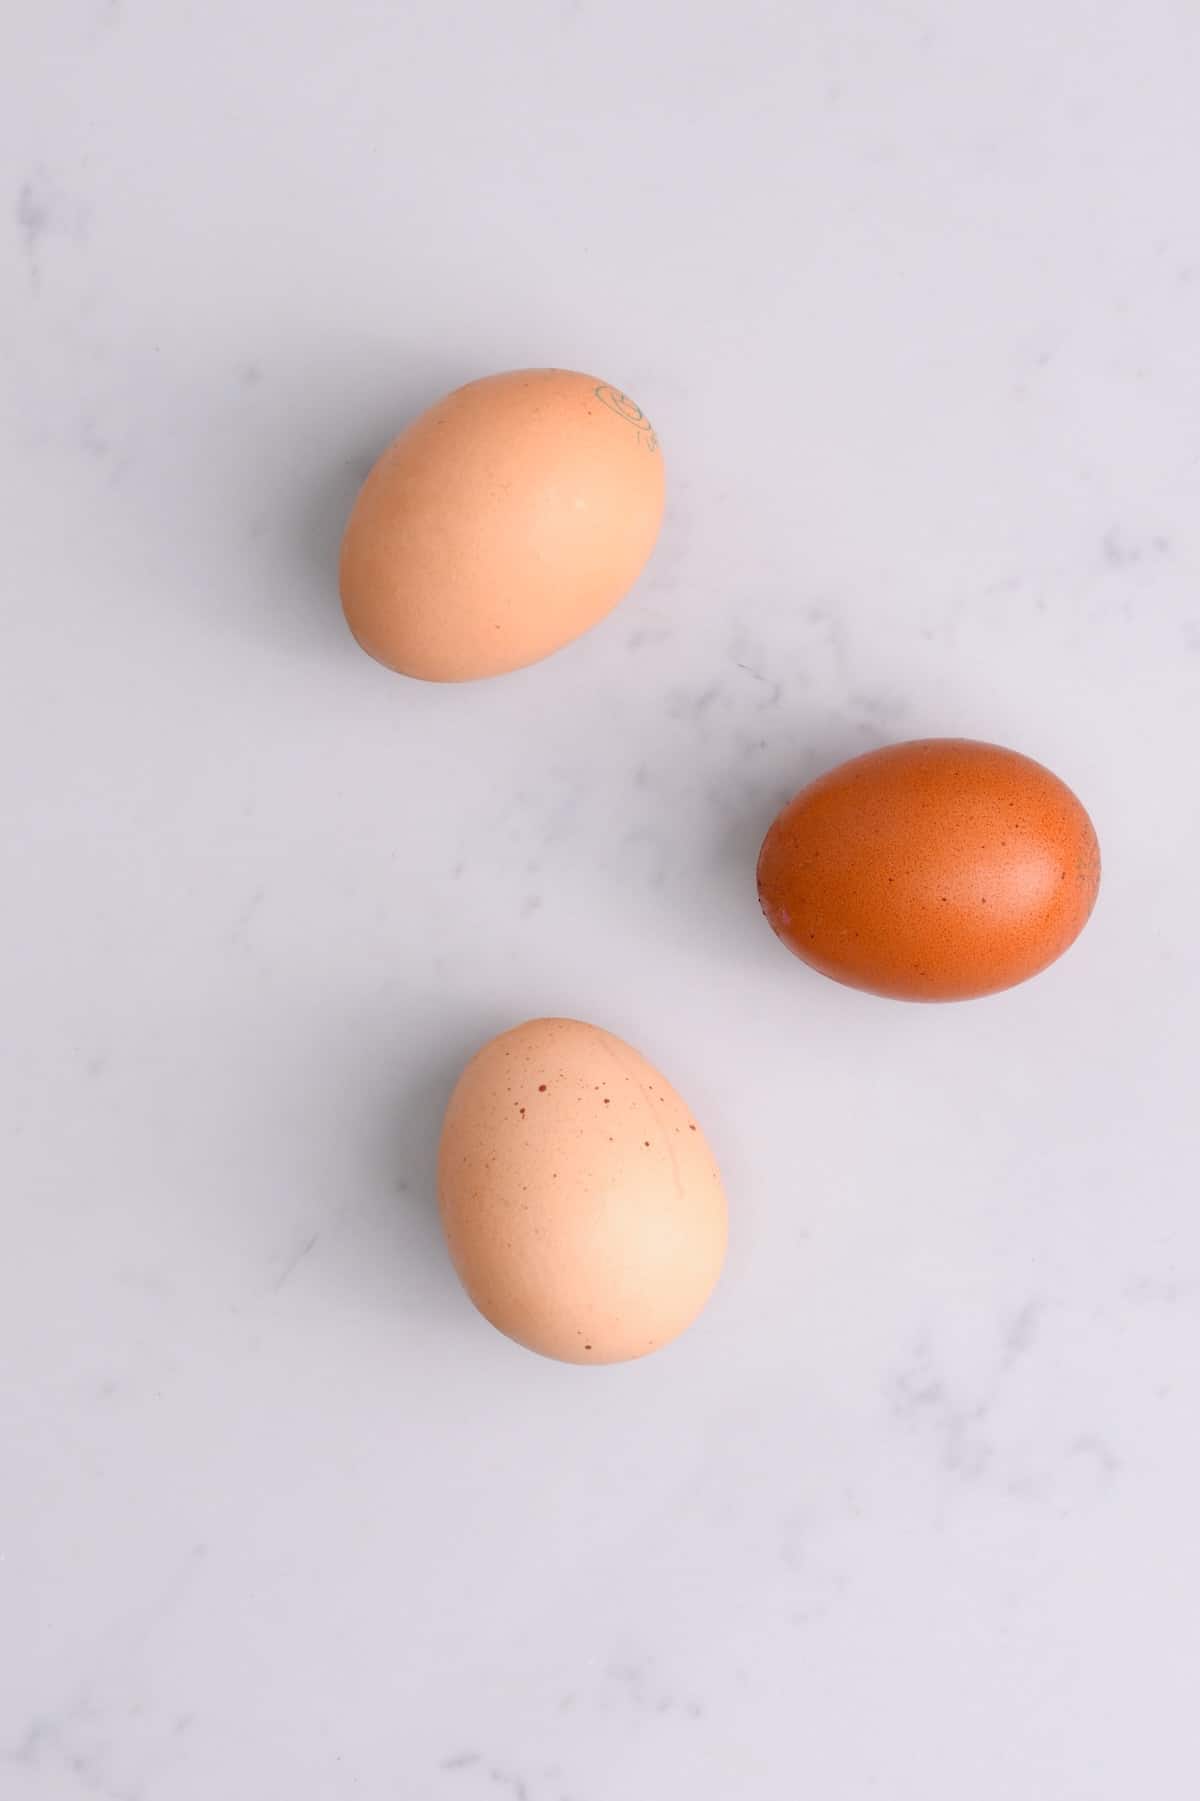 Three eggs on a flat surface